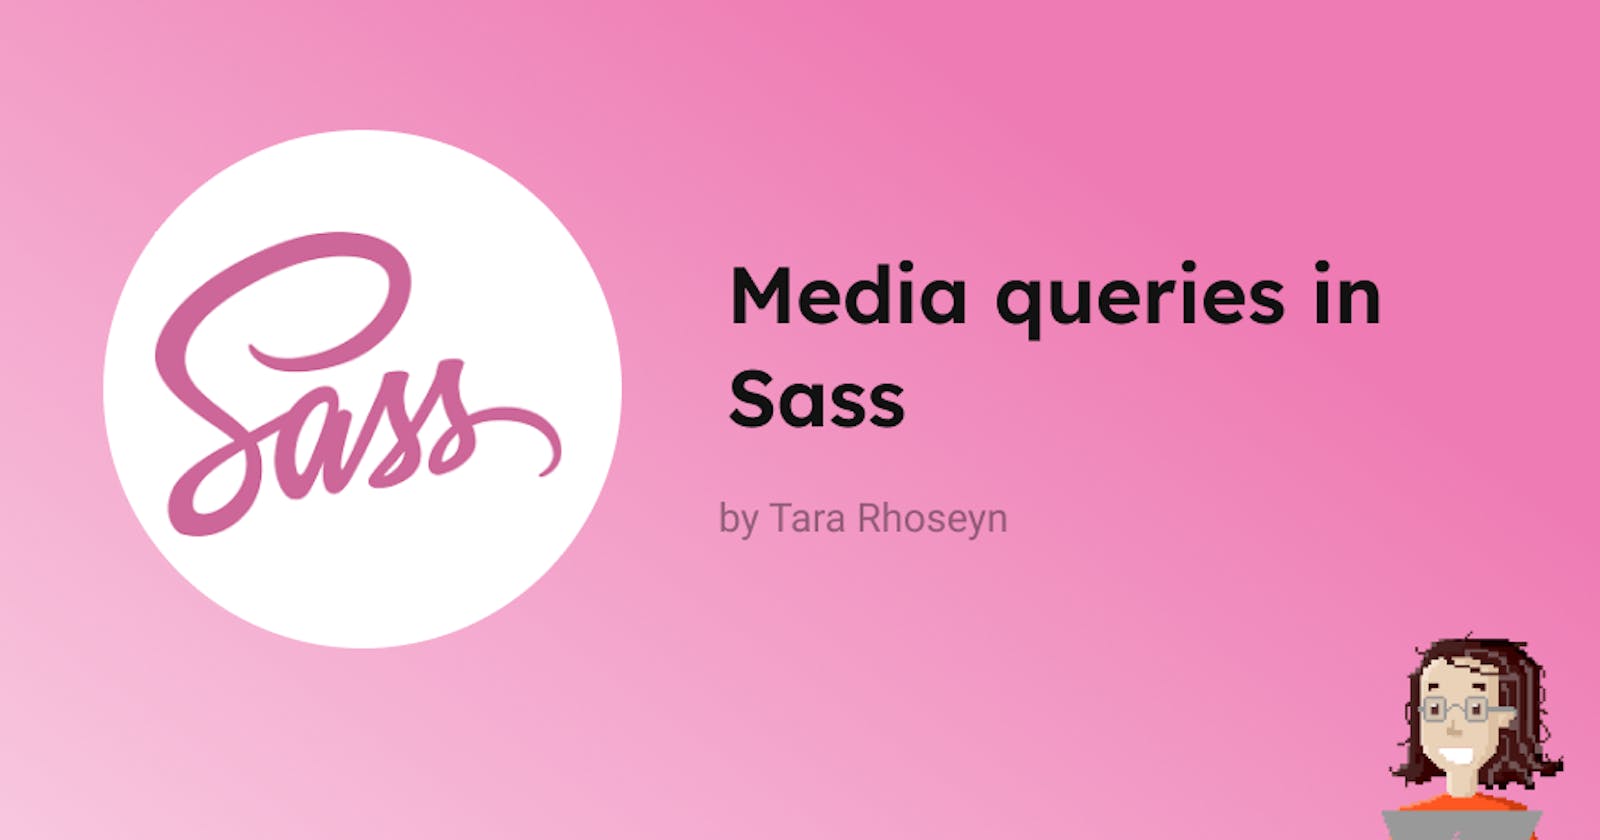 How to Write Media Queries in Sass